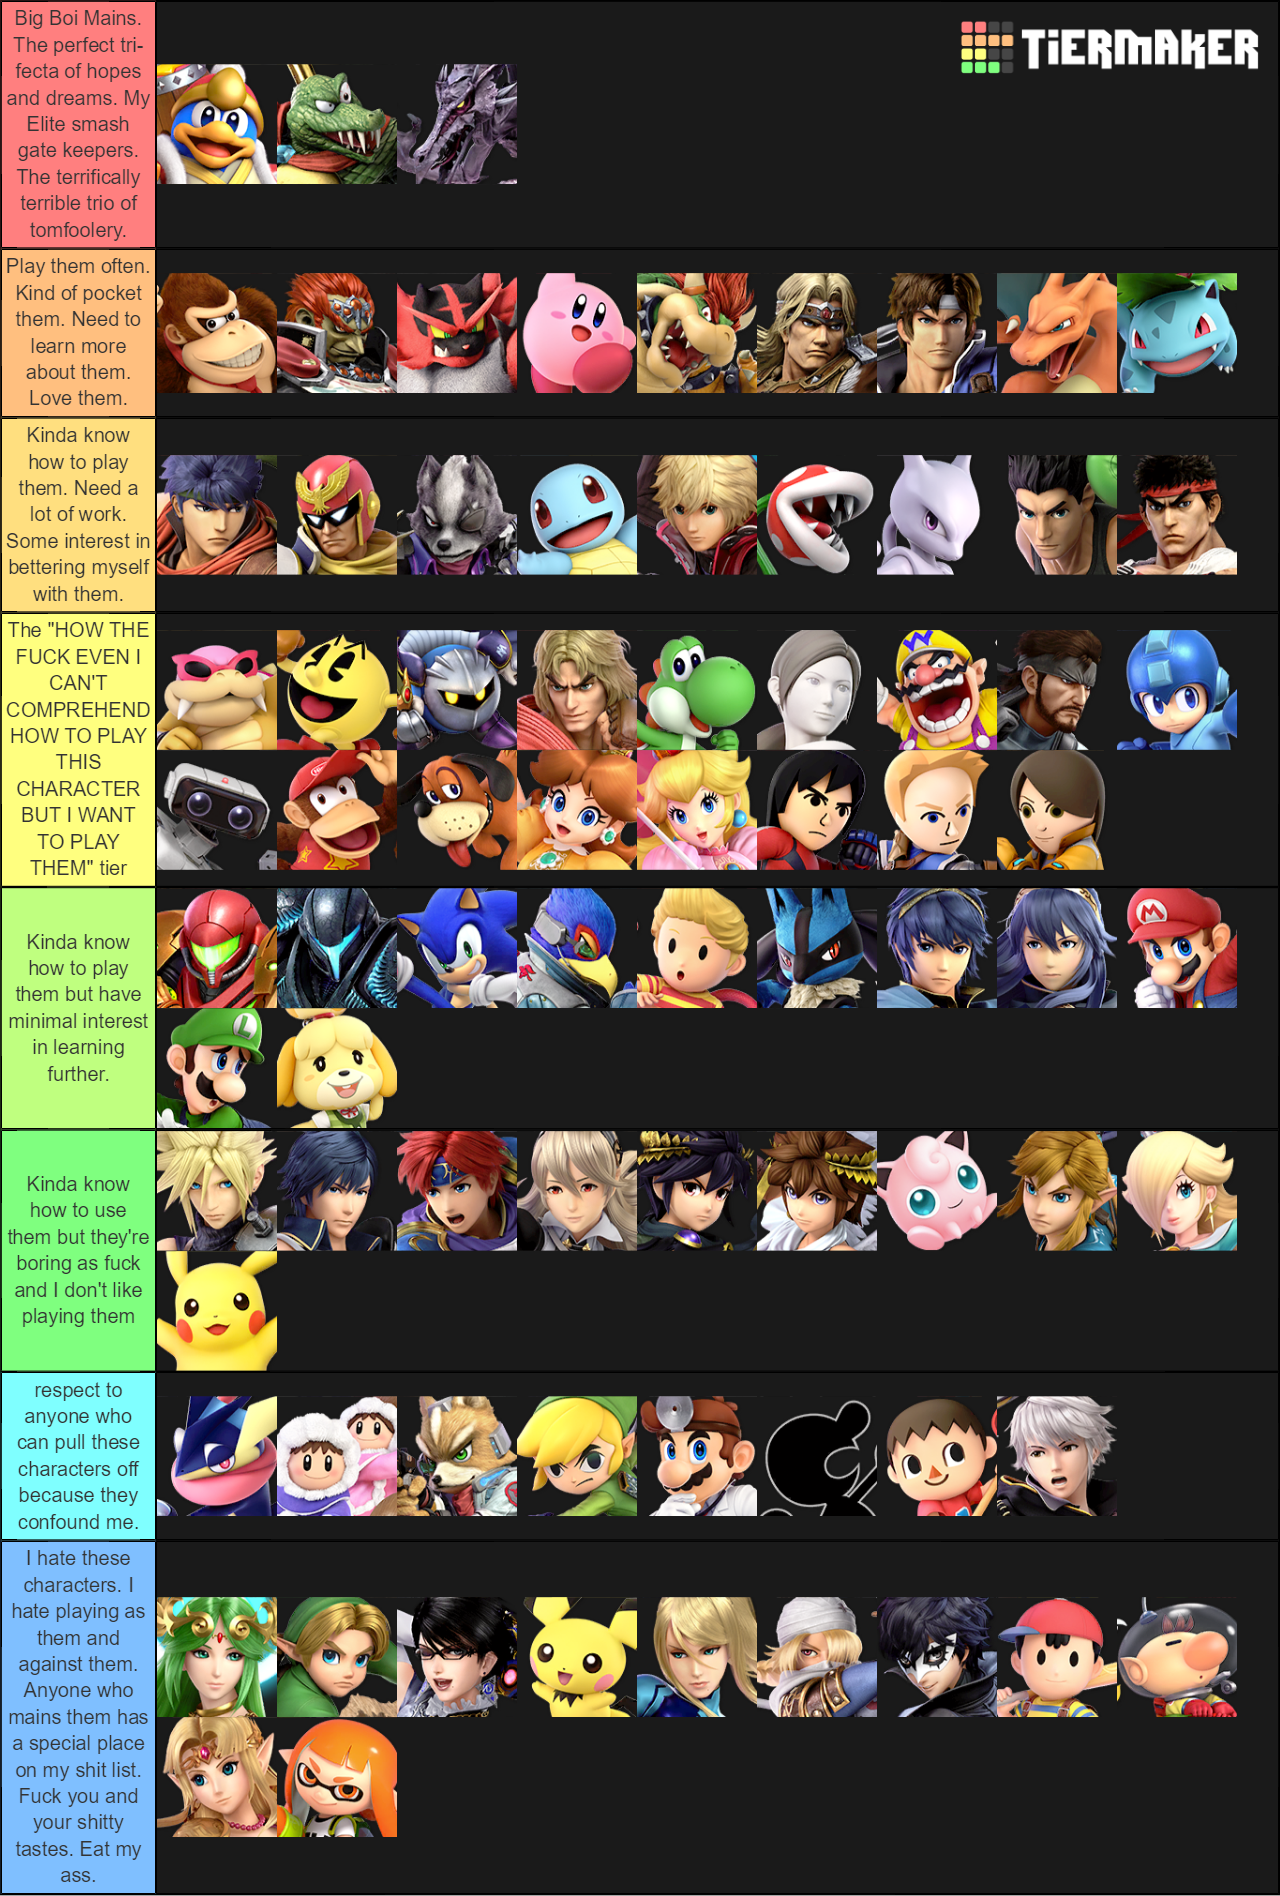 Index Of Images Tier Lists S3 91135